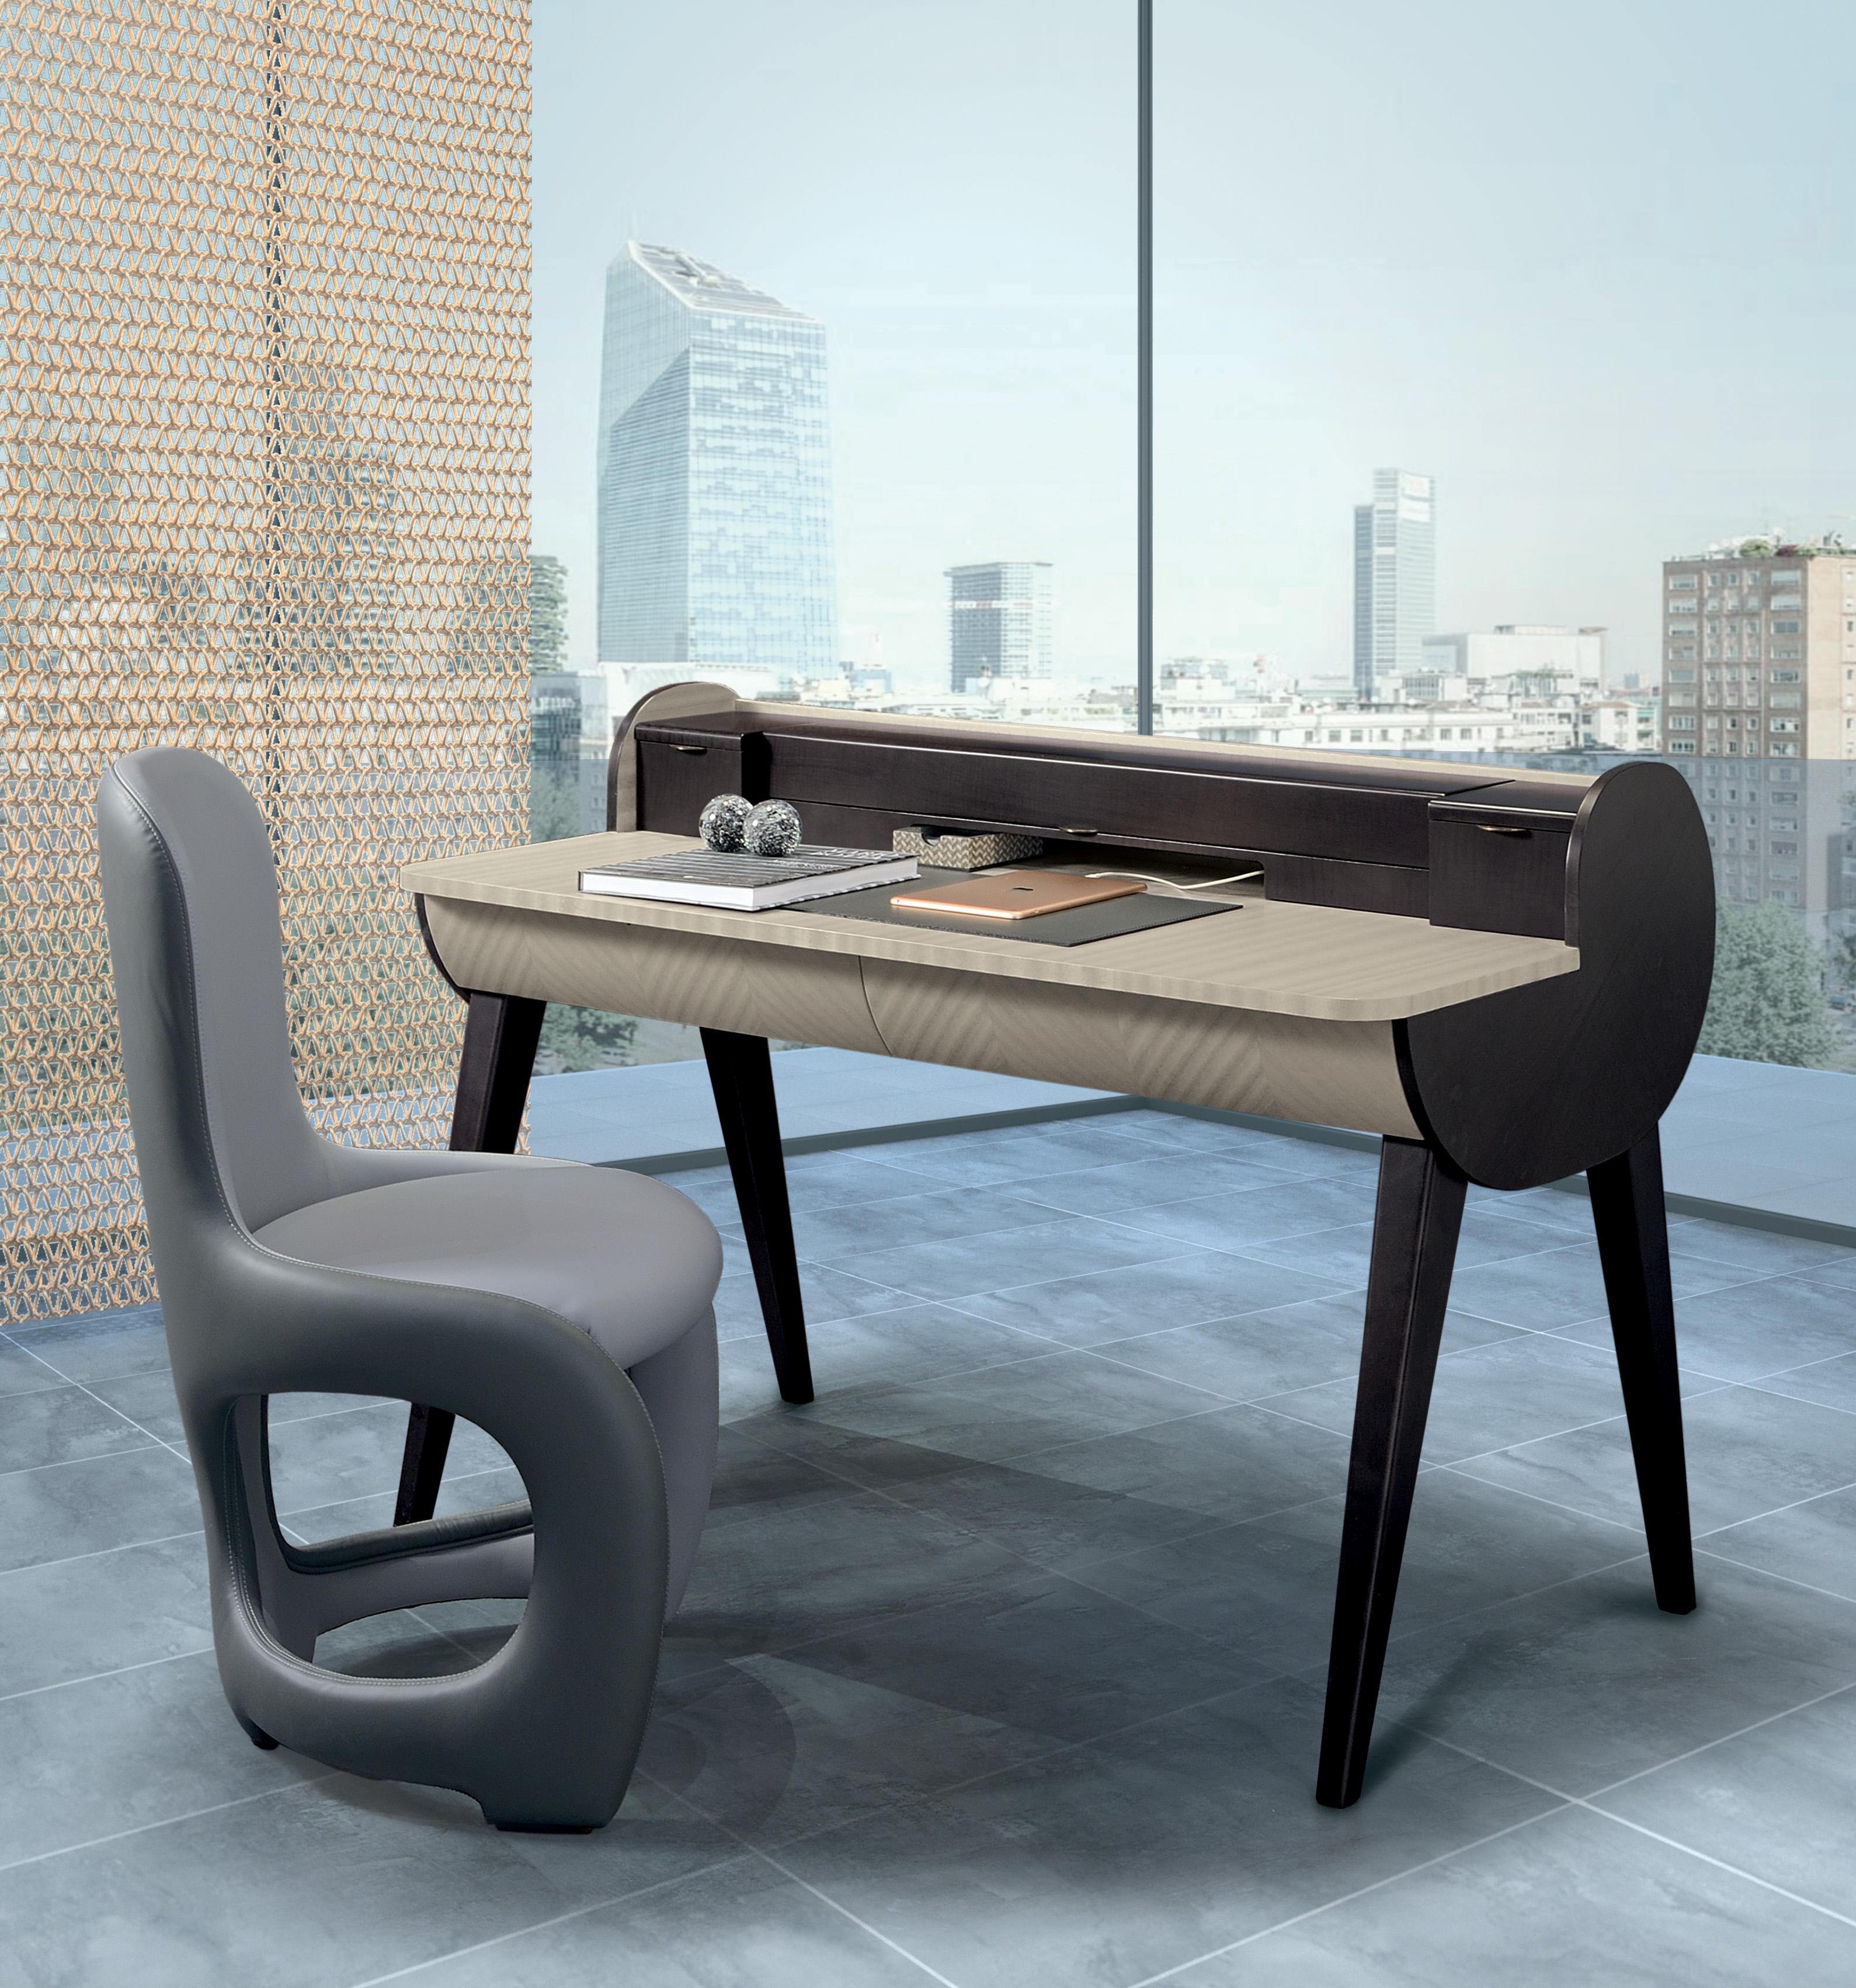 Desk characterized by the cylinder shape. The two sides are in Sycomoro dark frisè wood, internal structure in Pama wood. Horizontal flap door and soft closing. Optional accessories available on request: leather desk pad, business cards holder,